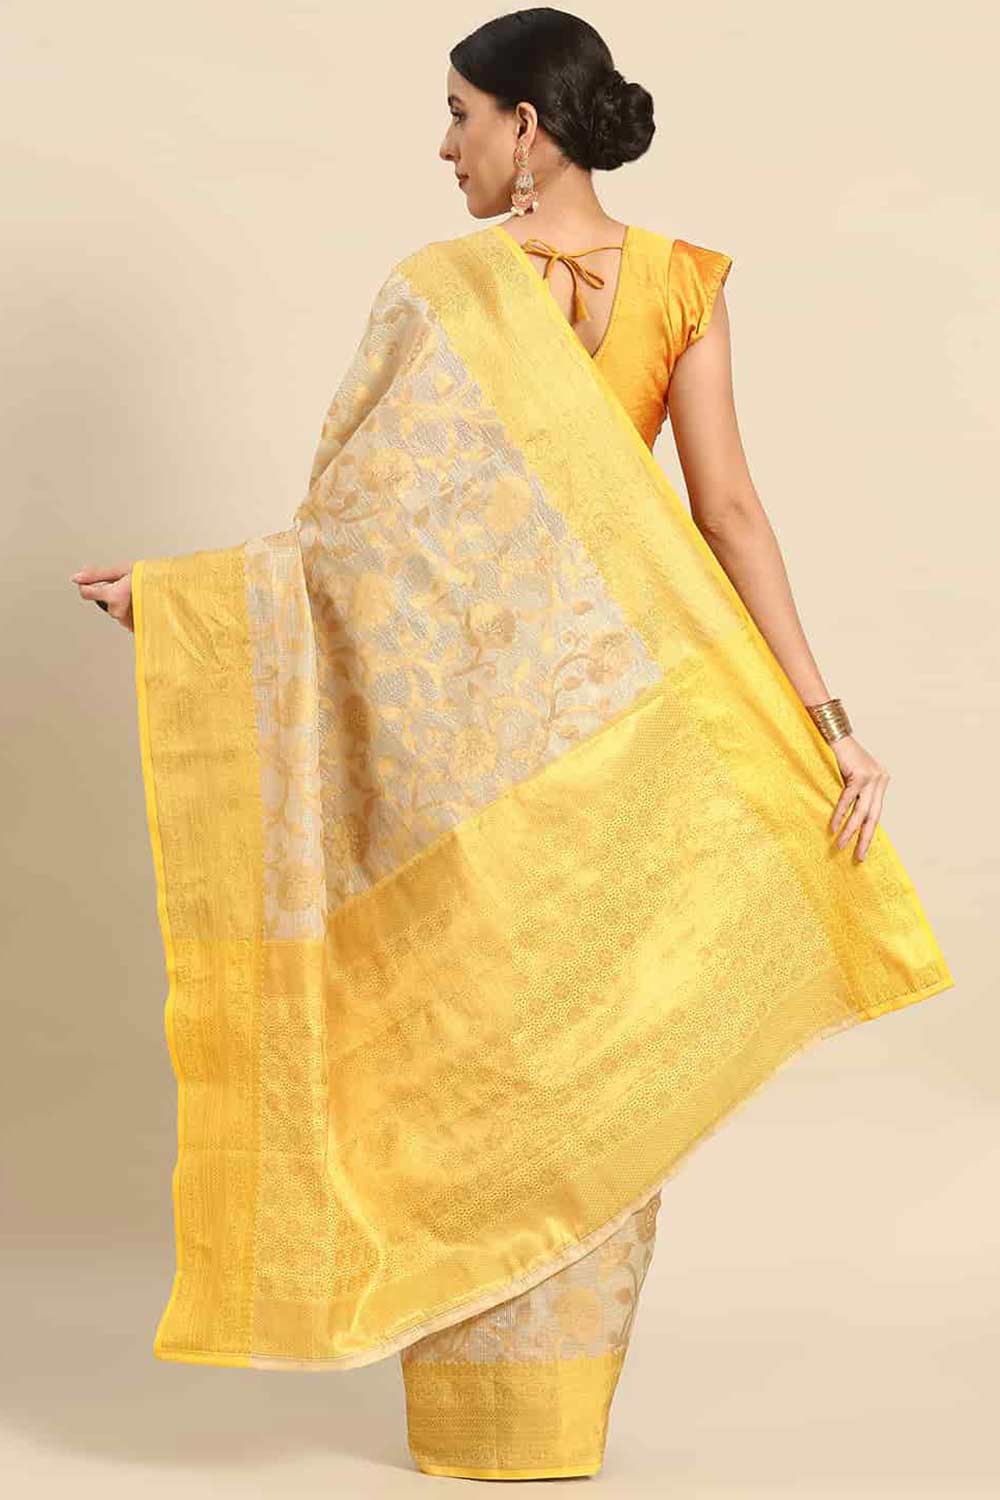 Shop Divya Beige Tusser Art Silk Floral Banarasi One Minute Saree at best offer at our  Store - One Minute Saree